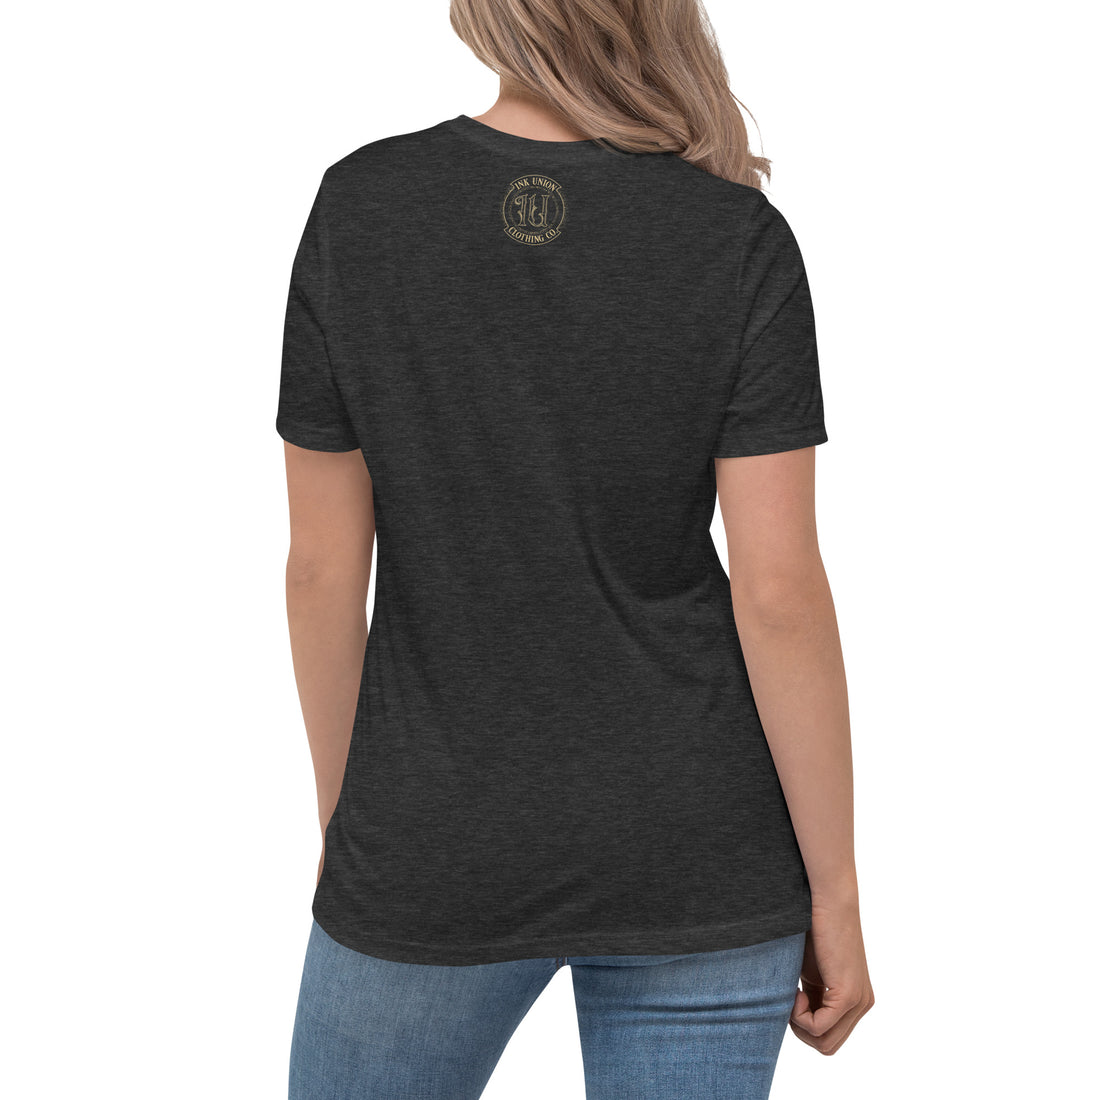 The back view of an attractive woman wearing a dark grey t-shirt with a small gold Ink Union Badge Logo centered just under the neckline.